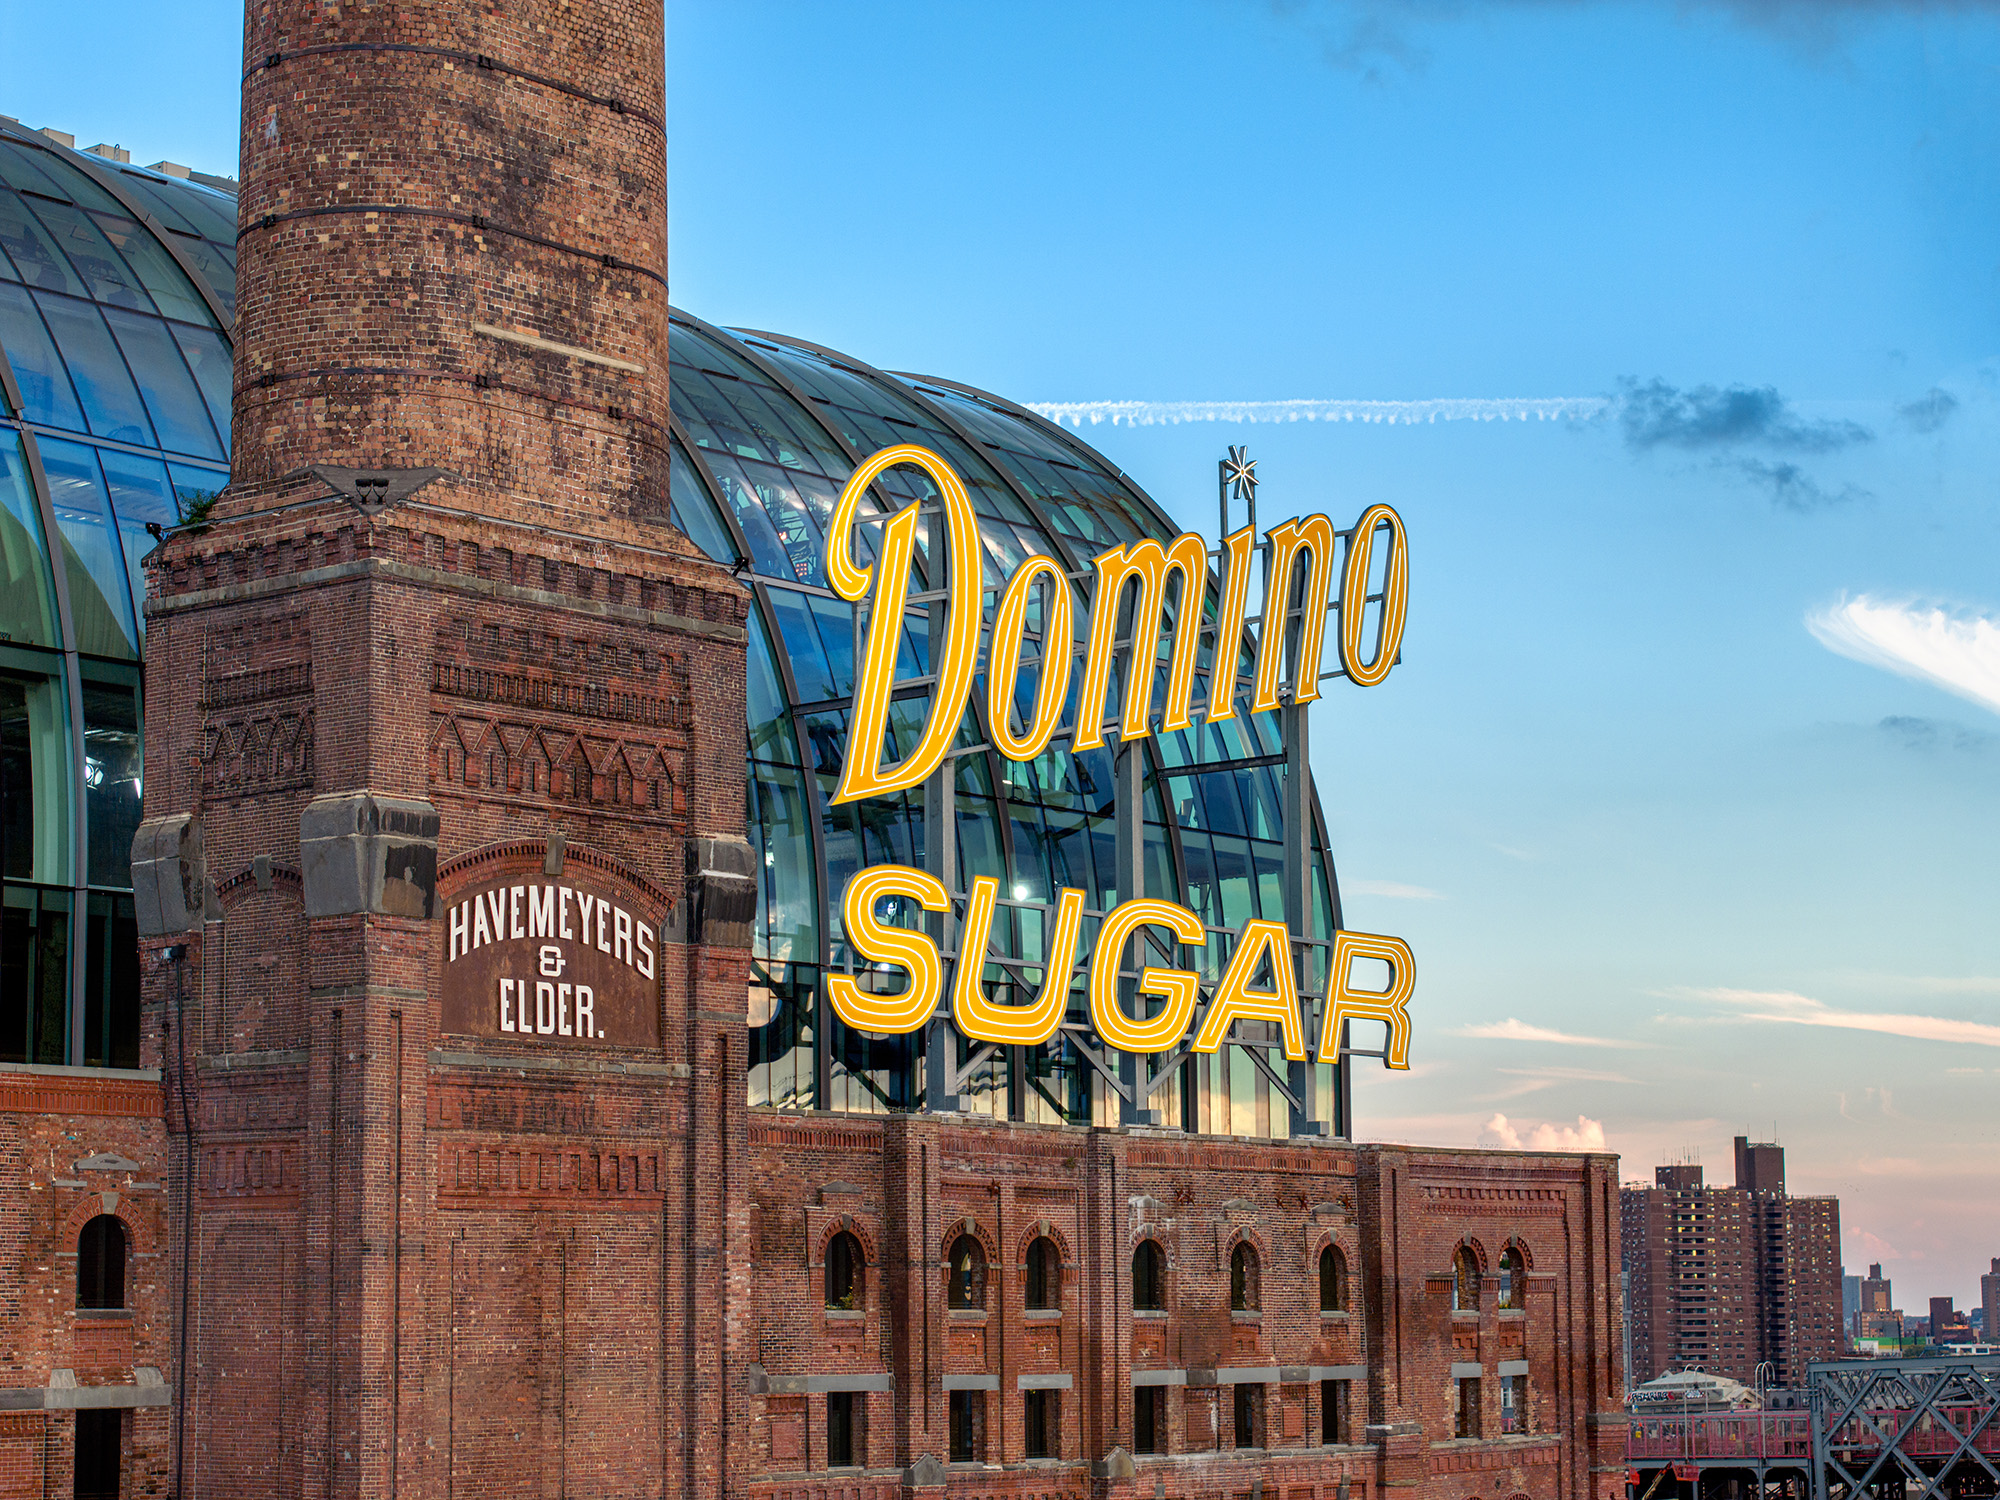 Brooklyn Domino Sugar Refinery Stages a Comeback as Office Space - Bloomberg